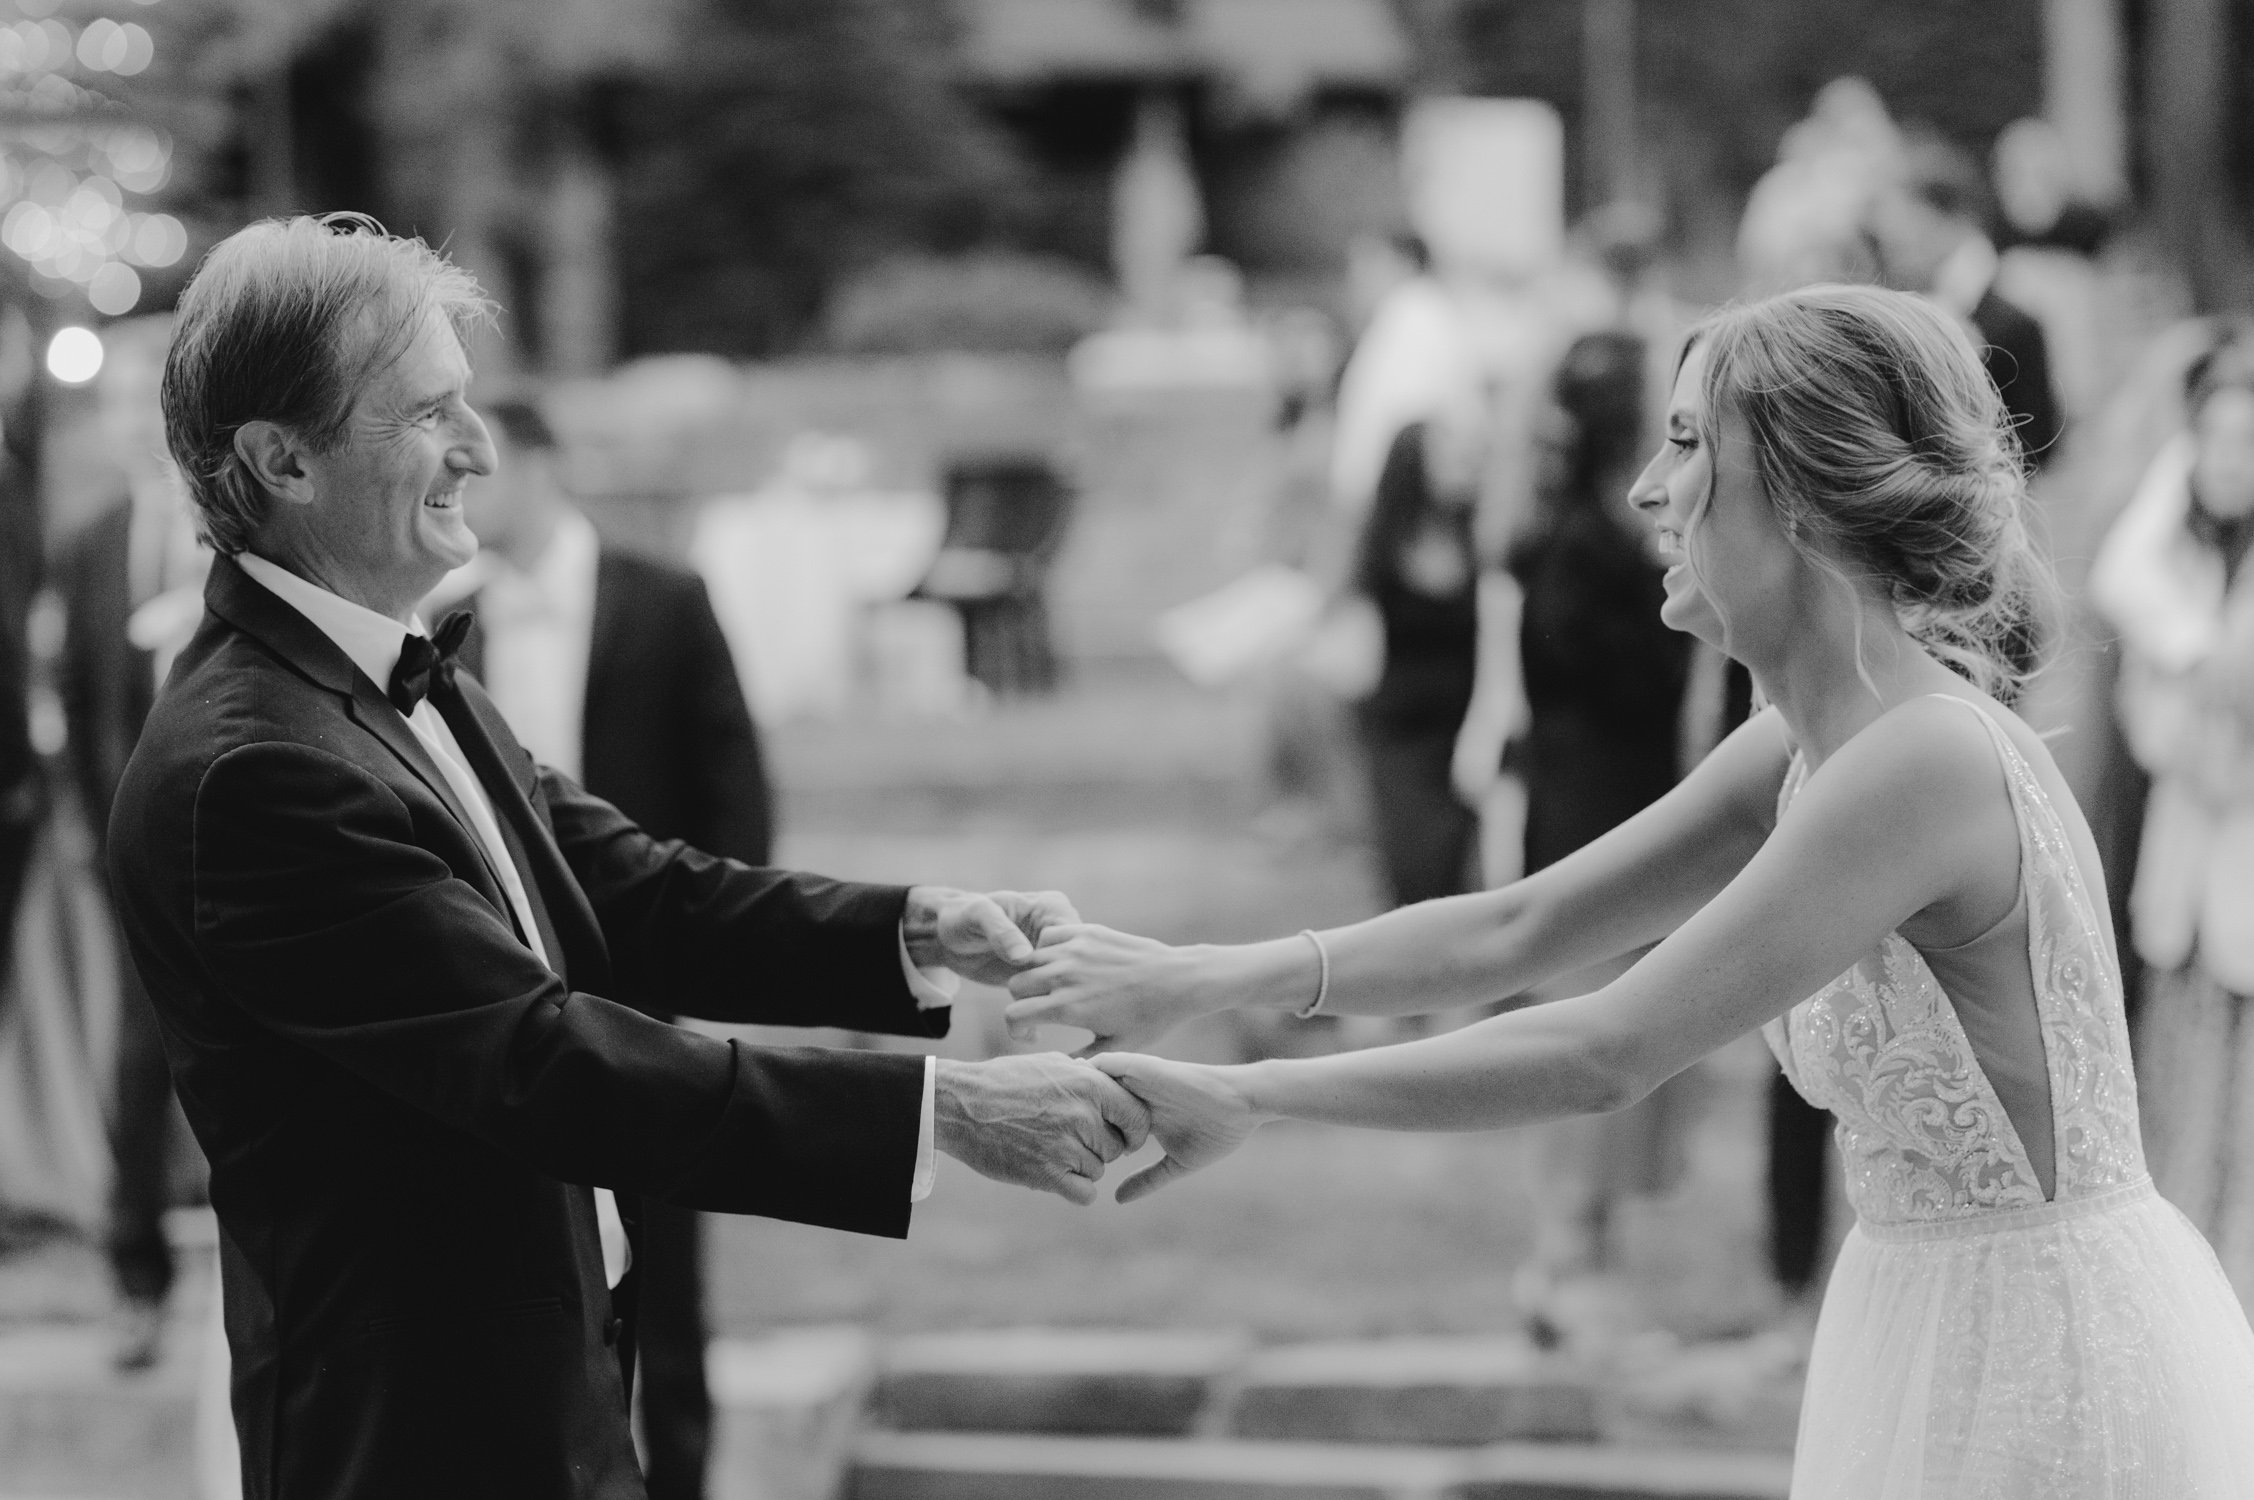 Martis Camp wedding photo of father daughter dance